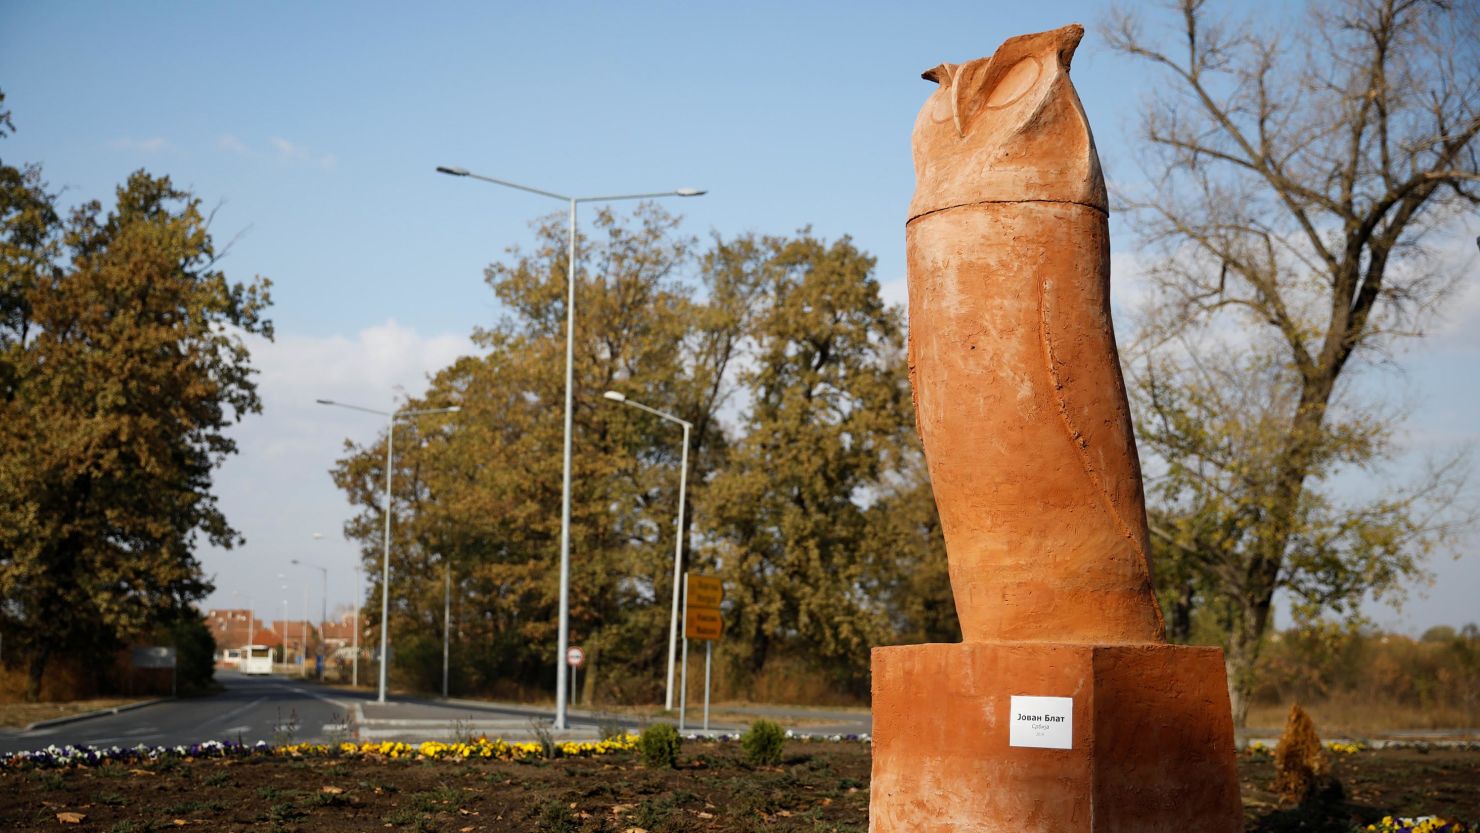 An owl statue in the Serbian city of Kikinda has drawn criticism from locals, who have likened the design to a phallus. 